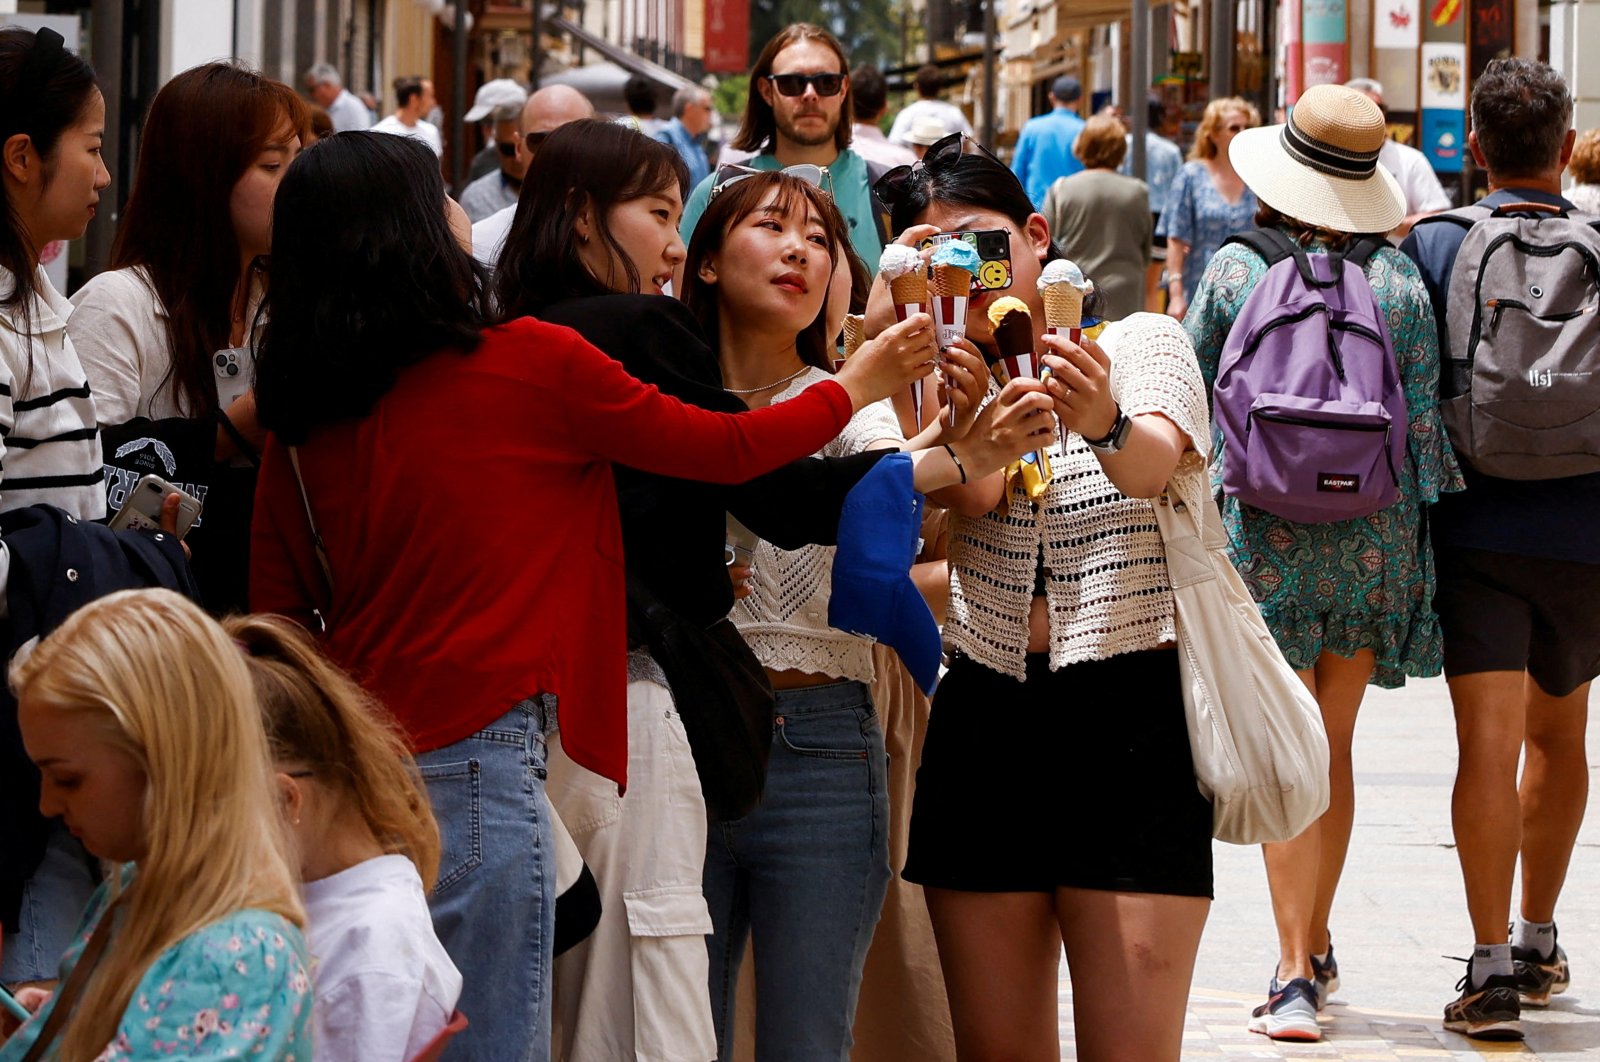 Tourists take a photo of their ice creams as they tour Ronda, Spain, May 25, 2022. (Reuters Photo)